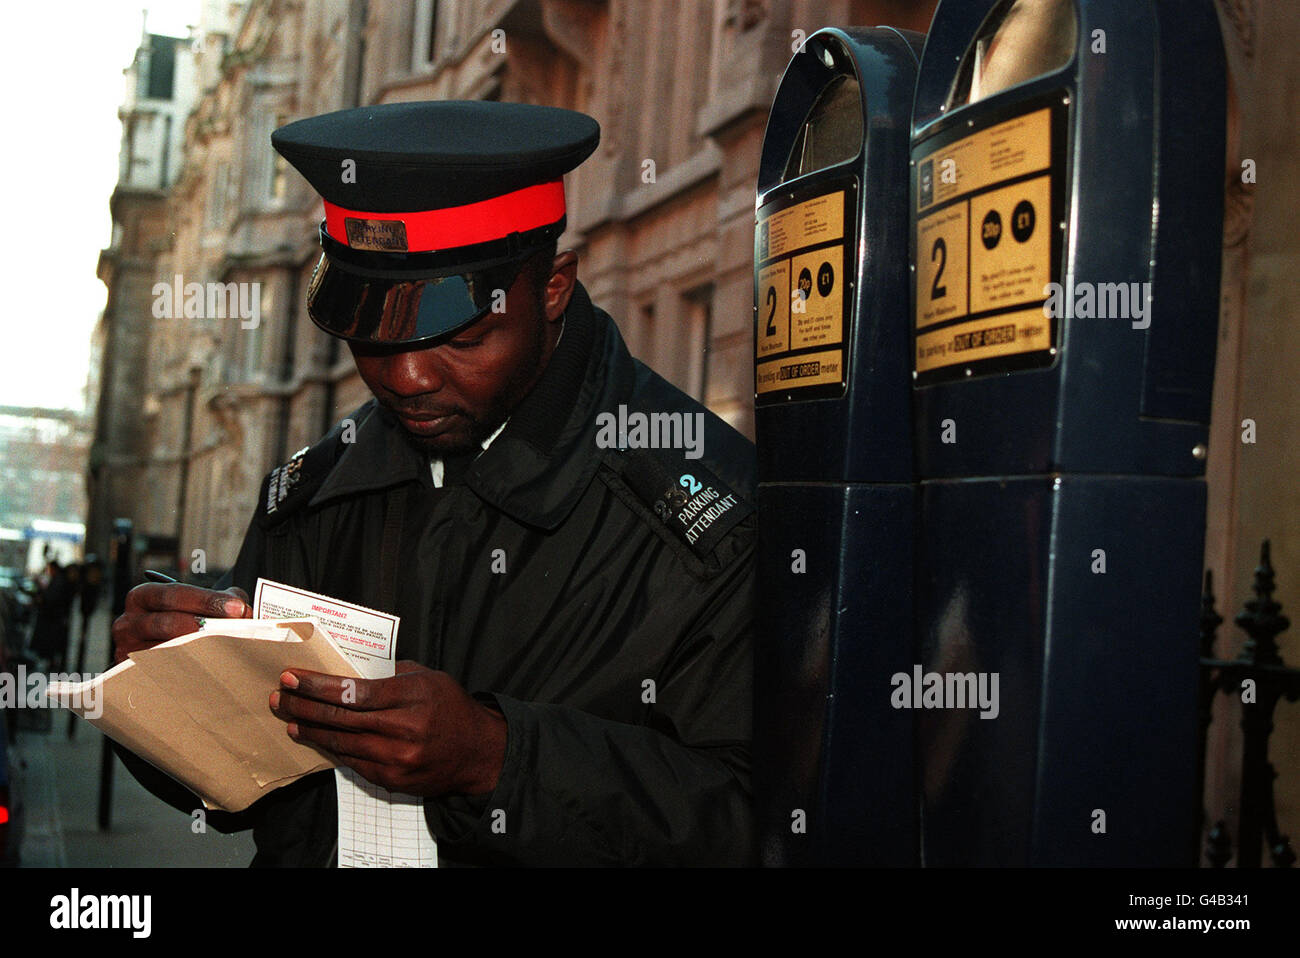 PA NEWS PHOTO 27/3/95 A TRAFFIC WARDEN ON HIS DAILY DUTIES IN LONDON Stock Photo